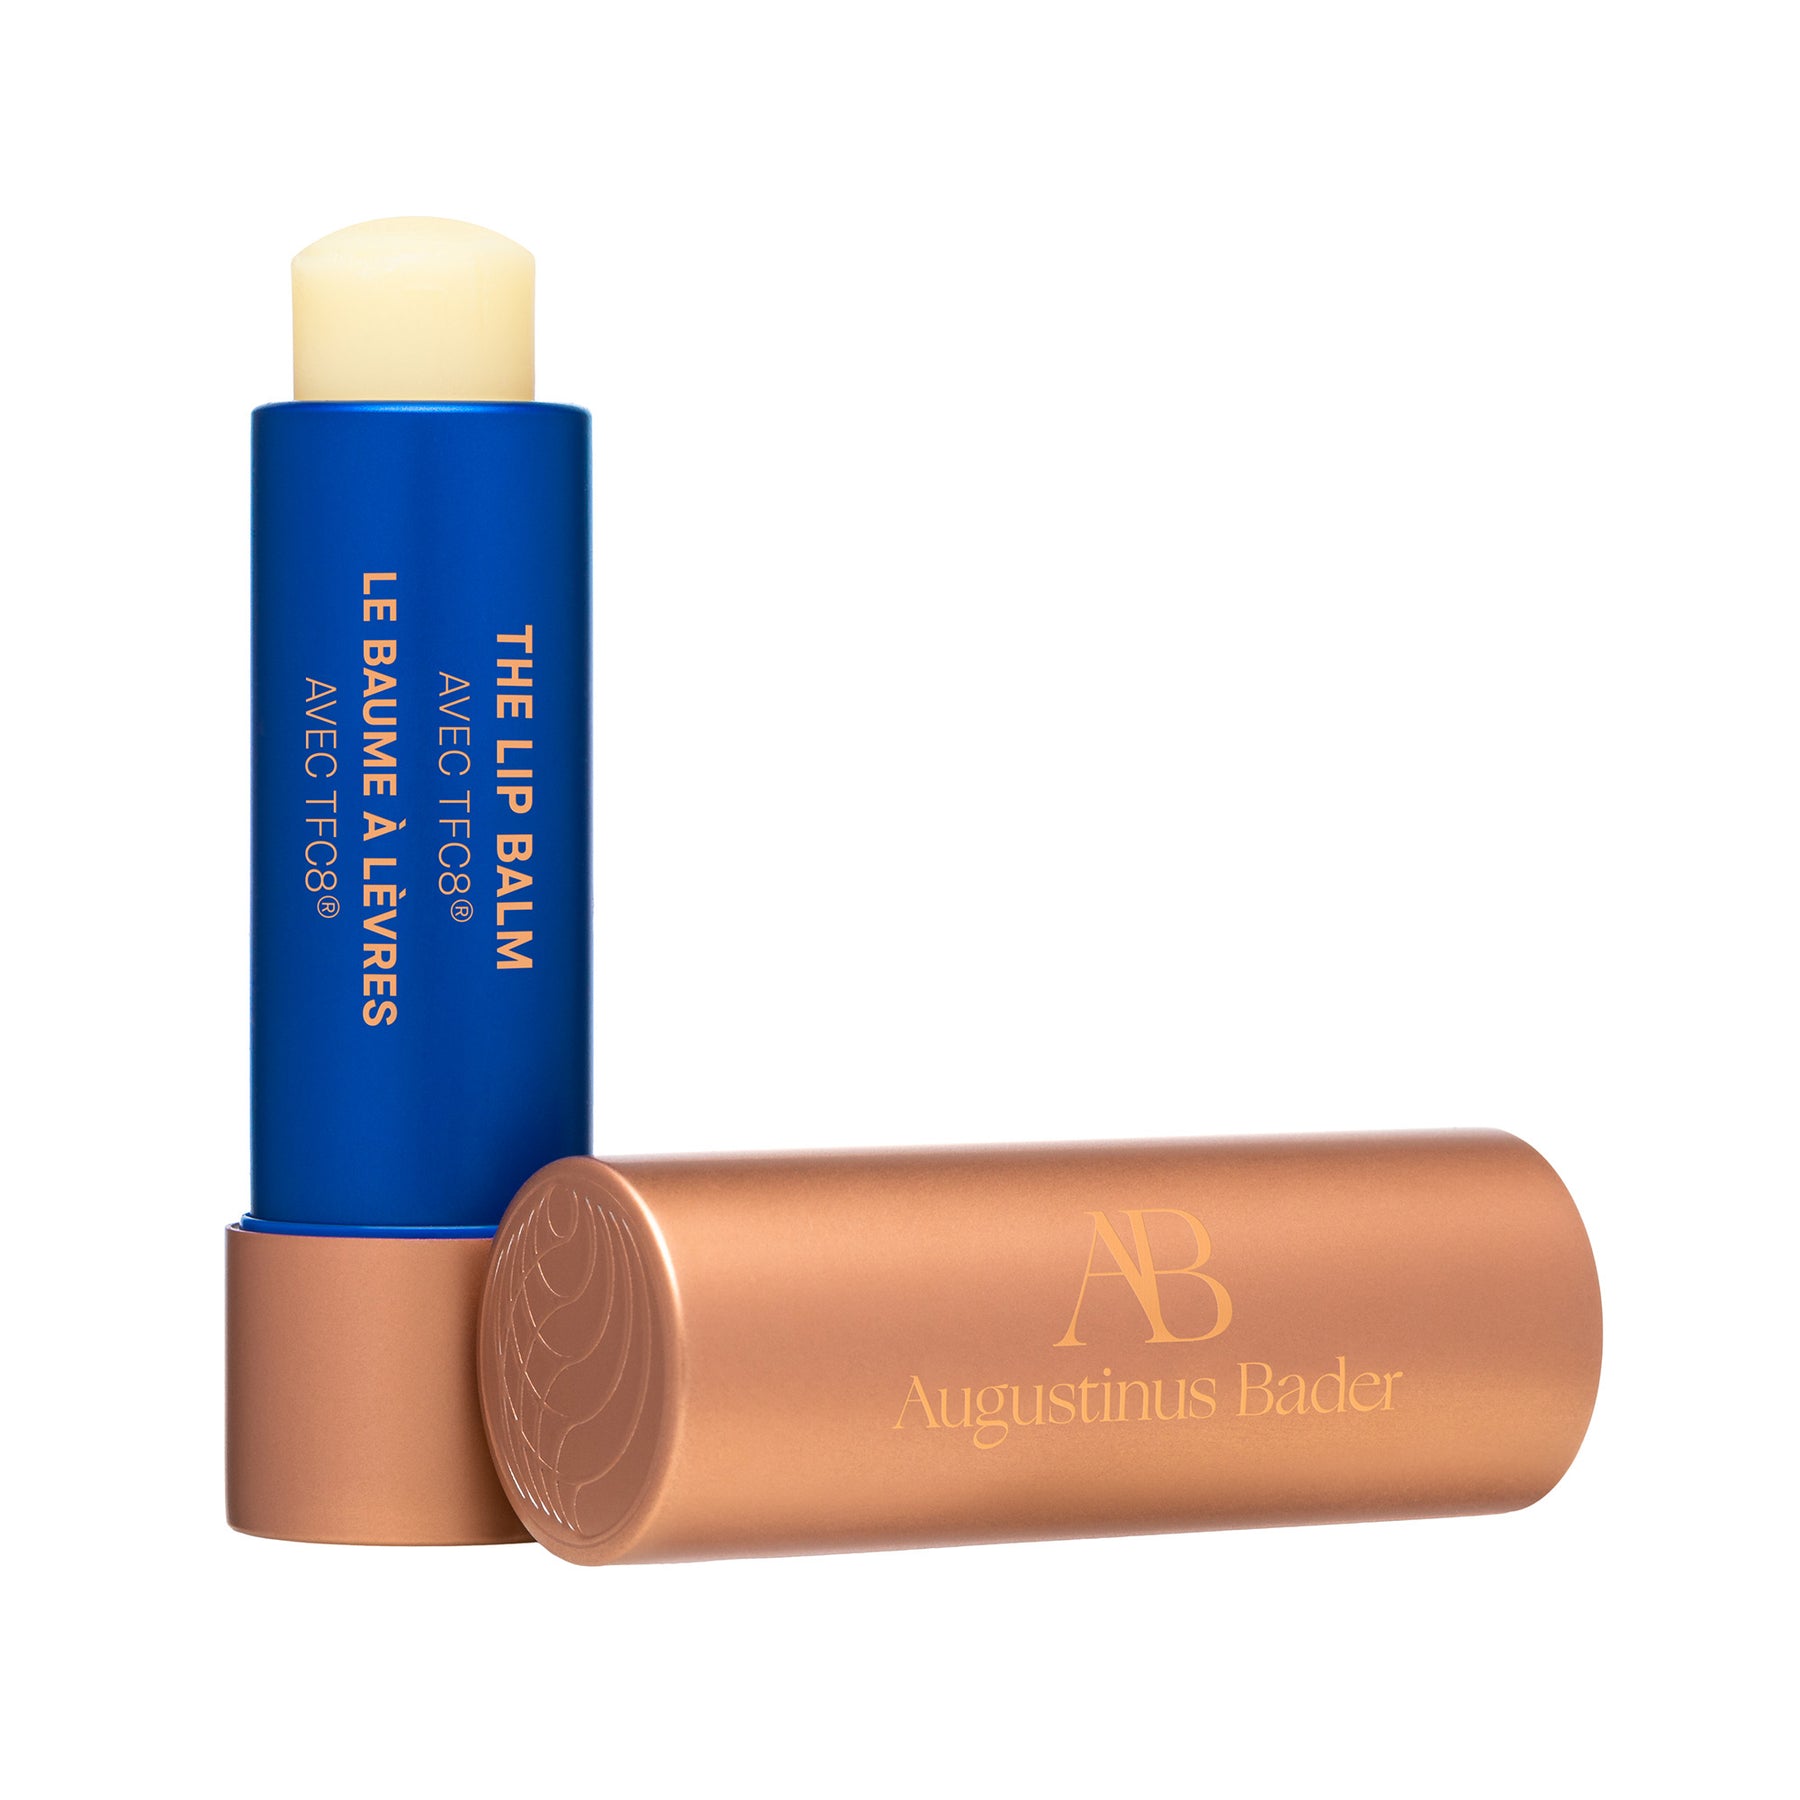 Review, Augustinus Bader The Lip Balm